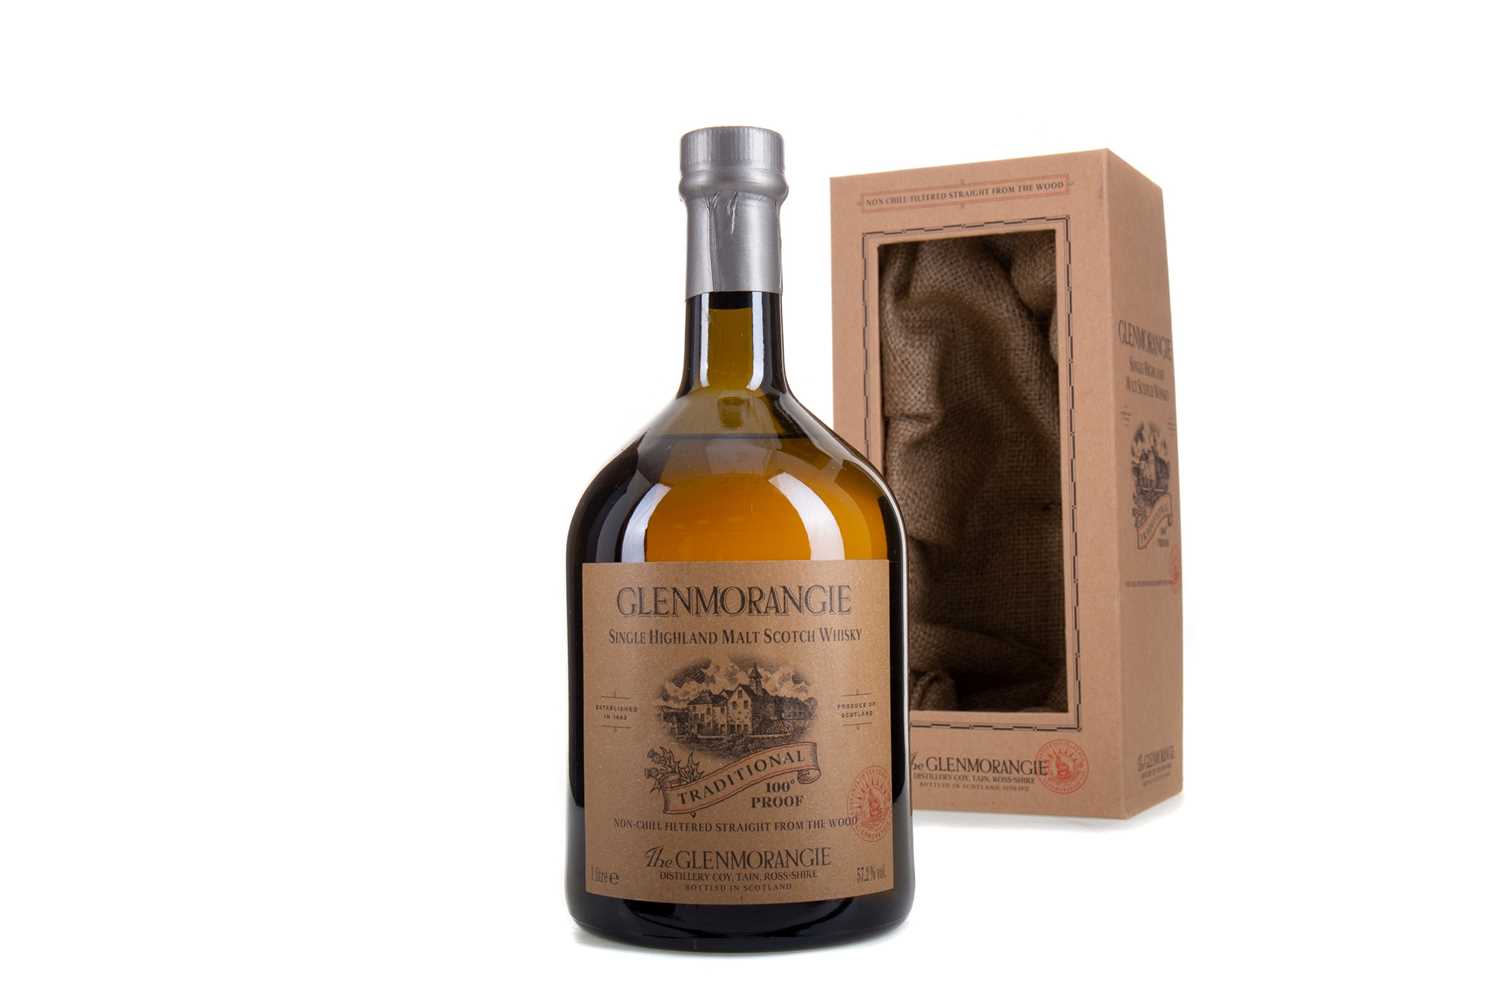 Lot 69 - GLENMORANGIE 10 YEAR OLD TRADITIONAL 100° PROOF 1L